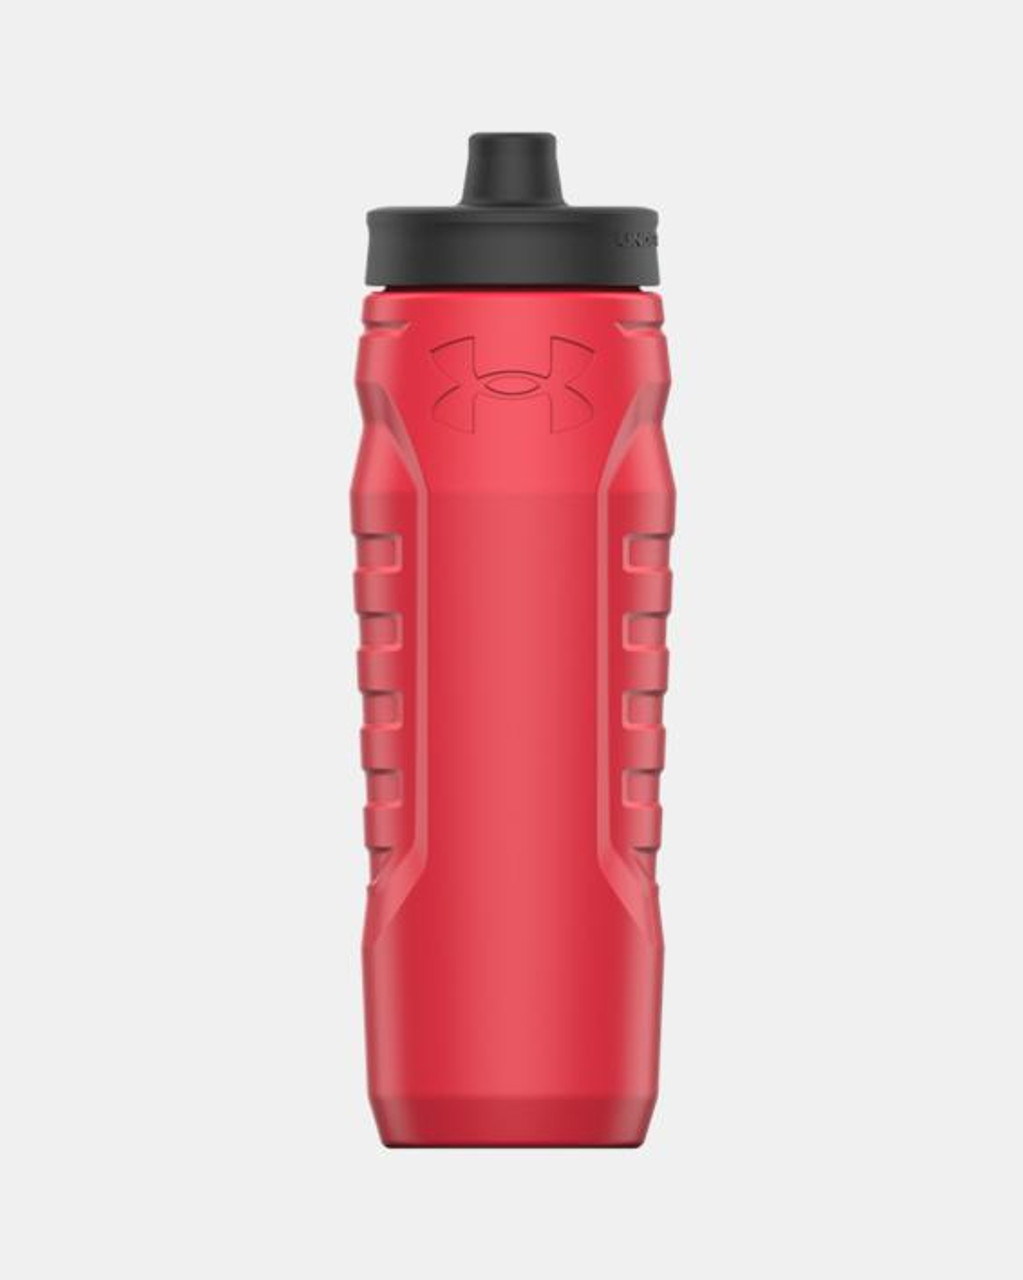 Under Armour Undeniable 32 Oz. Squeezable Water Bottle With Quick Shot Lid  in Green